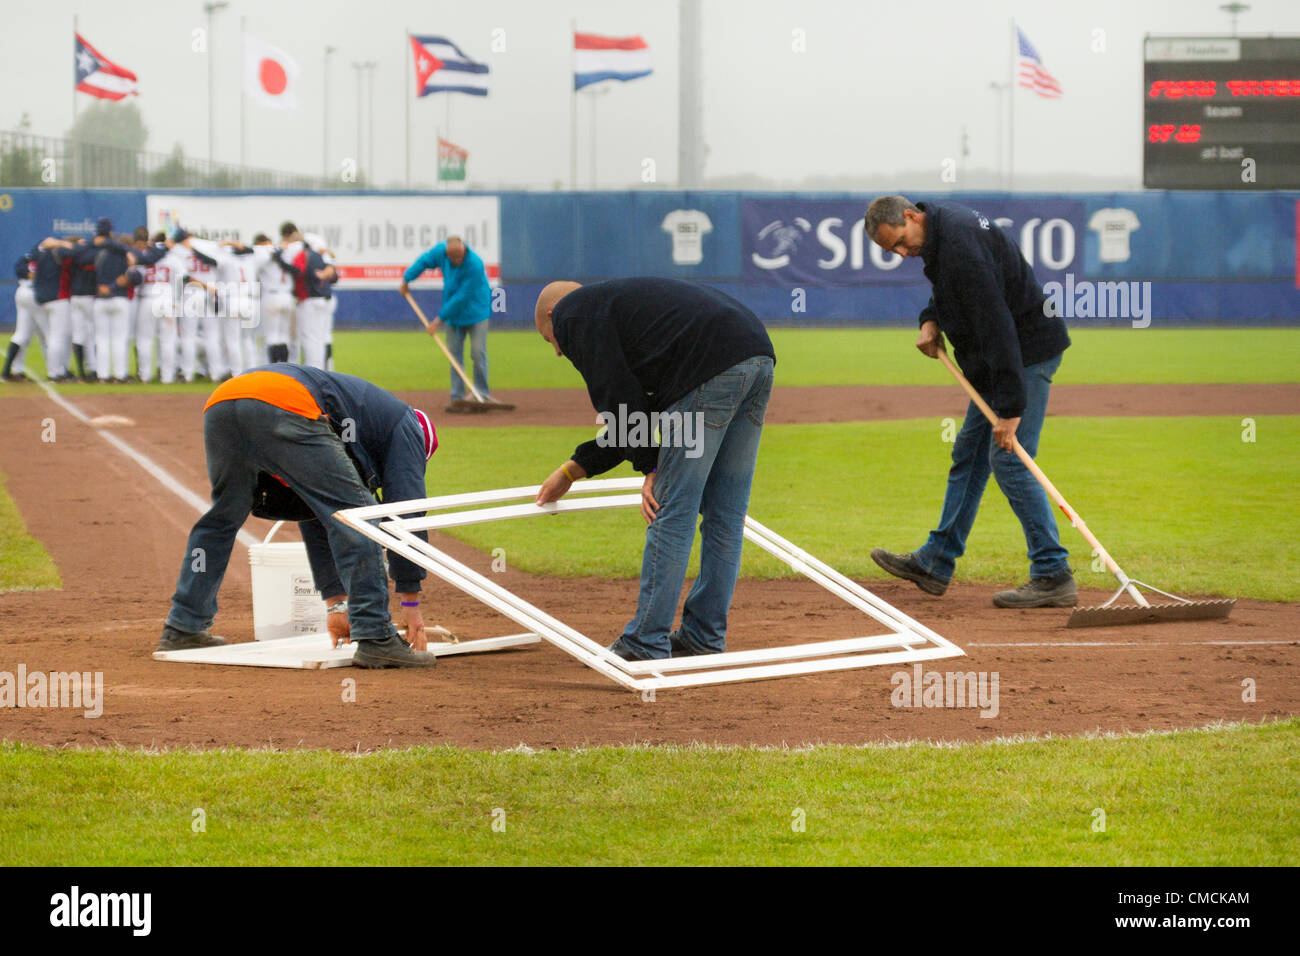 HAARLEM, THE NETHERLANDS, 18/07/2012. The field crew prepares the home plate before the match USA versus Chinese Taipei at the Haarlem Baseball Week 2012. Stock Photo